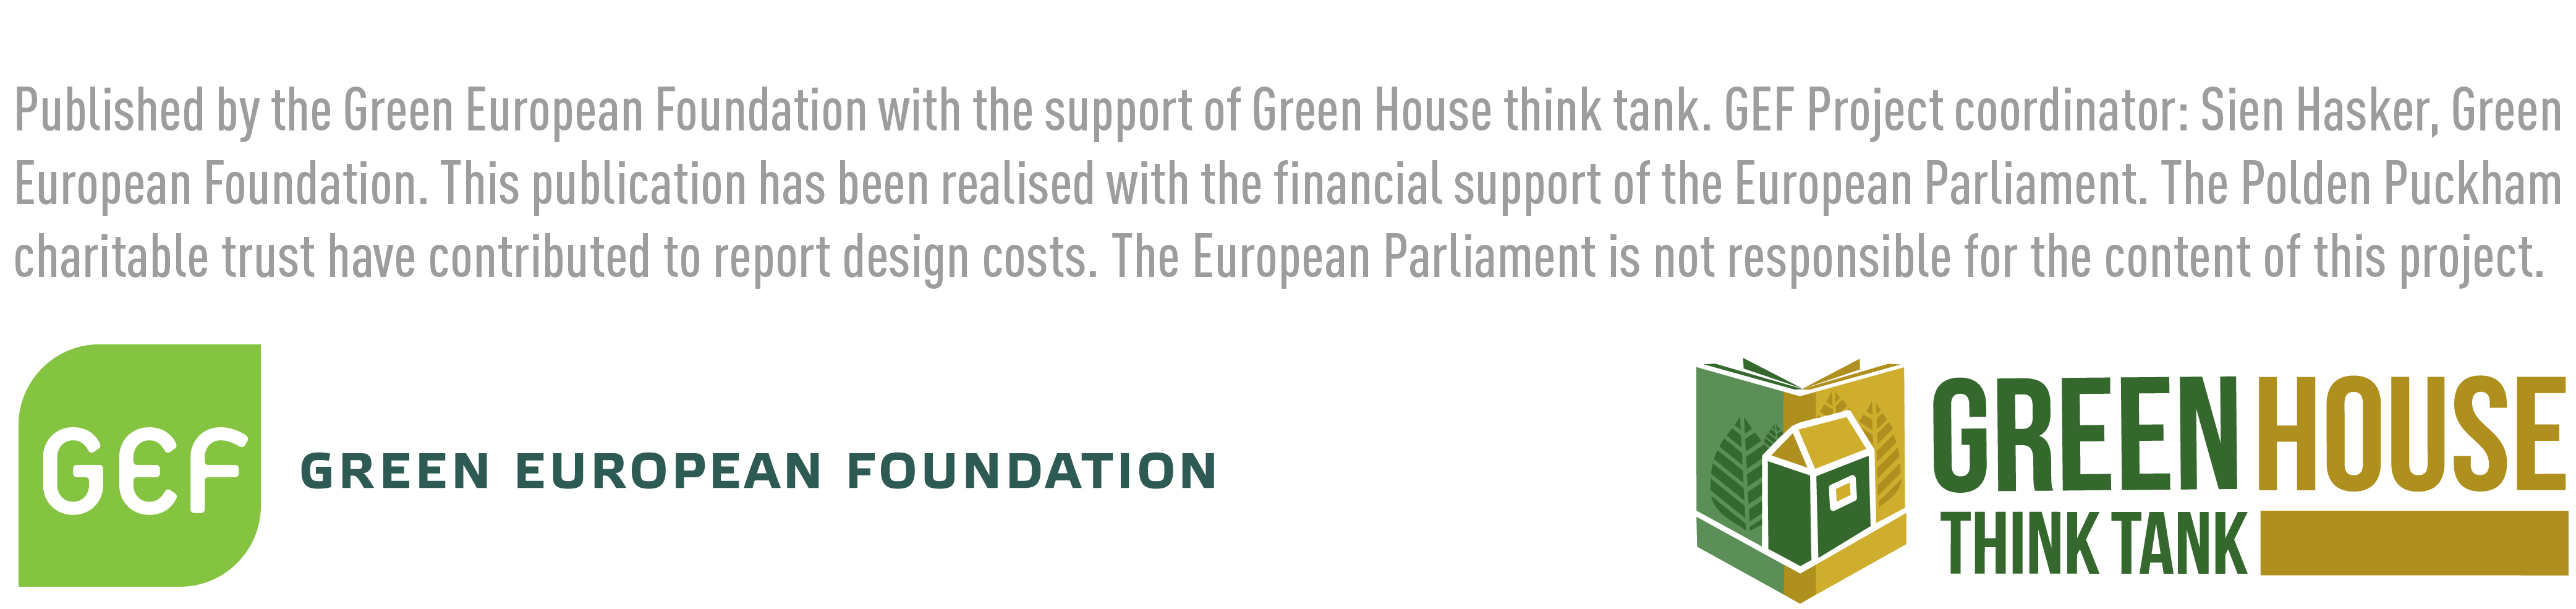 Image of the Logos of the Green European Foundation and Green House think tank, with text that readsPublished by the Green European Foundation with the support of Green House think tank. GEF project coordinator: Sian Hasker, Green European Foundation. This publication has been realised with financial support of the European parliament. The Polden Puckham charitable trust have contributed to the report design costs. The European Parliament is not responsible for the content of this project. 